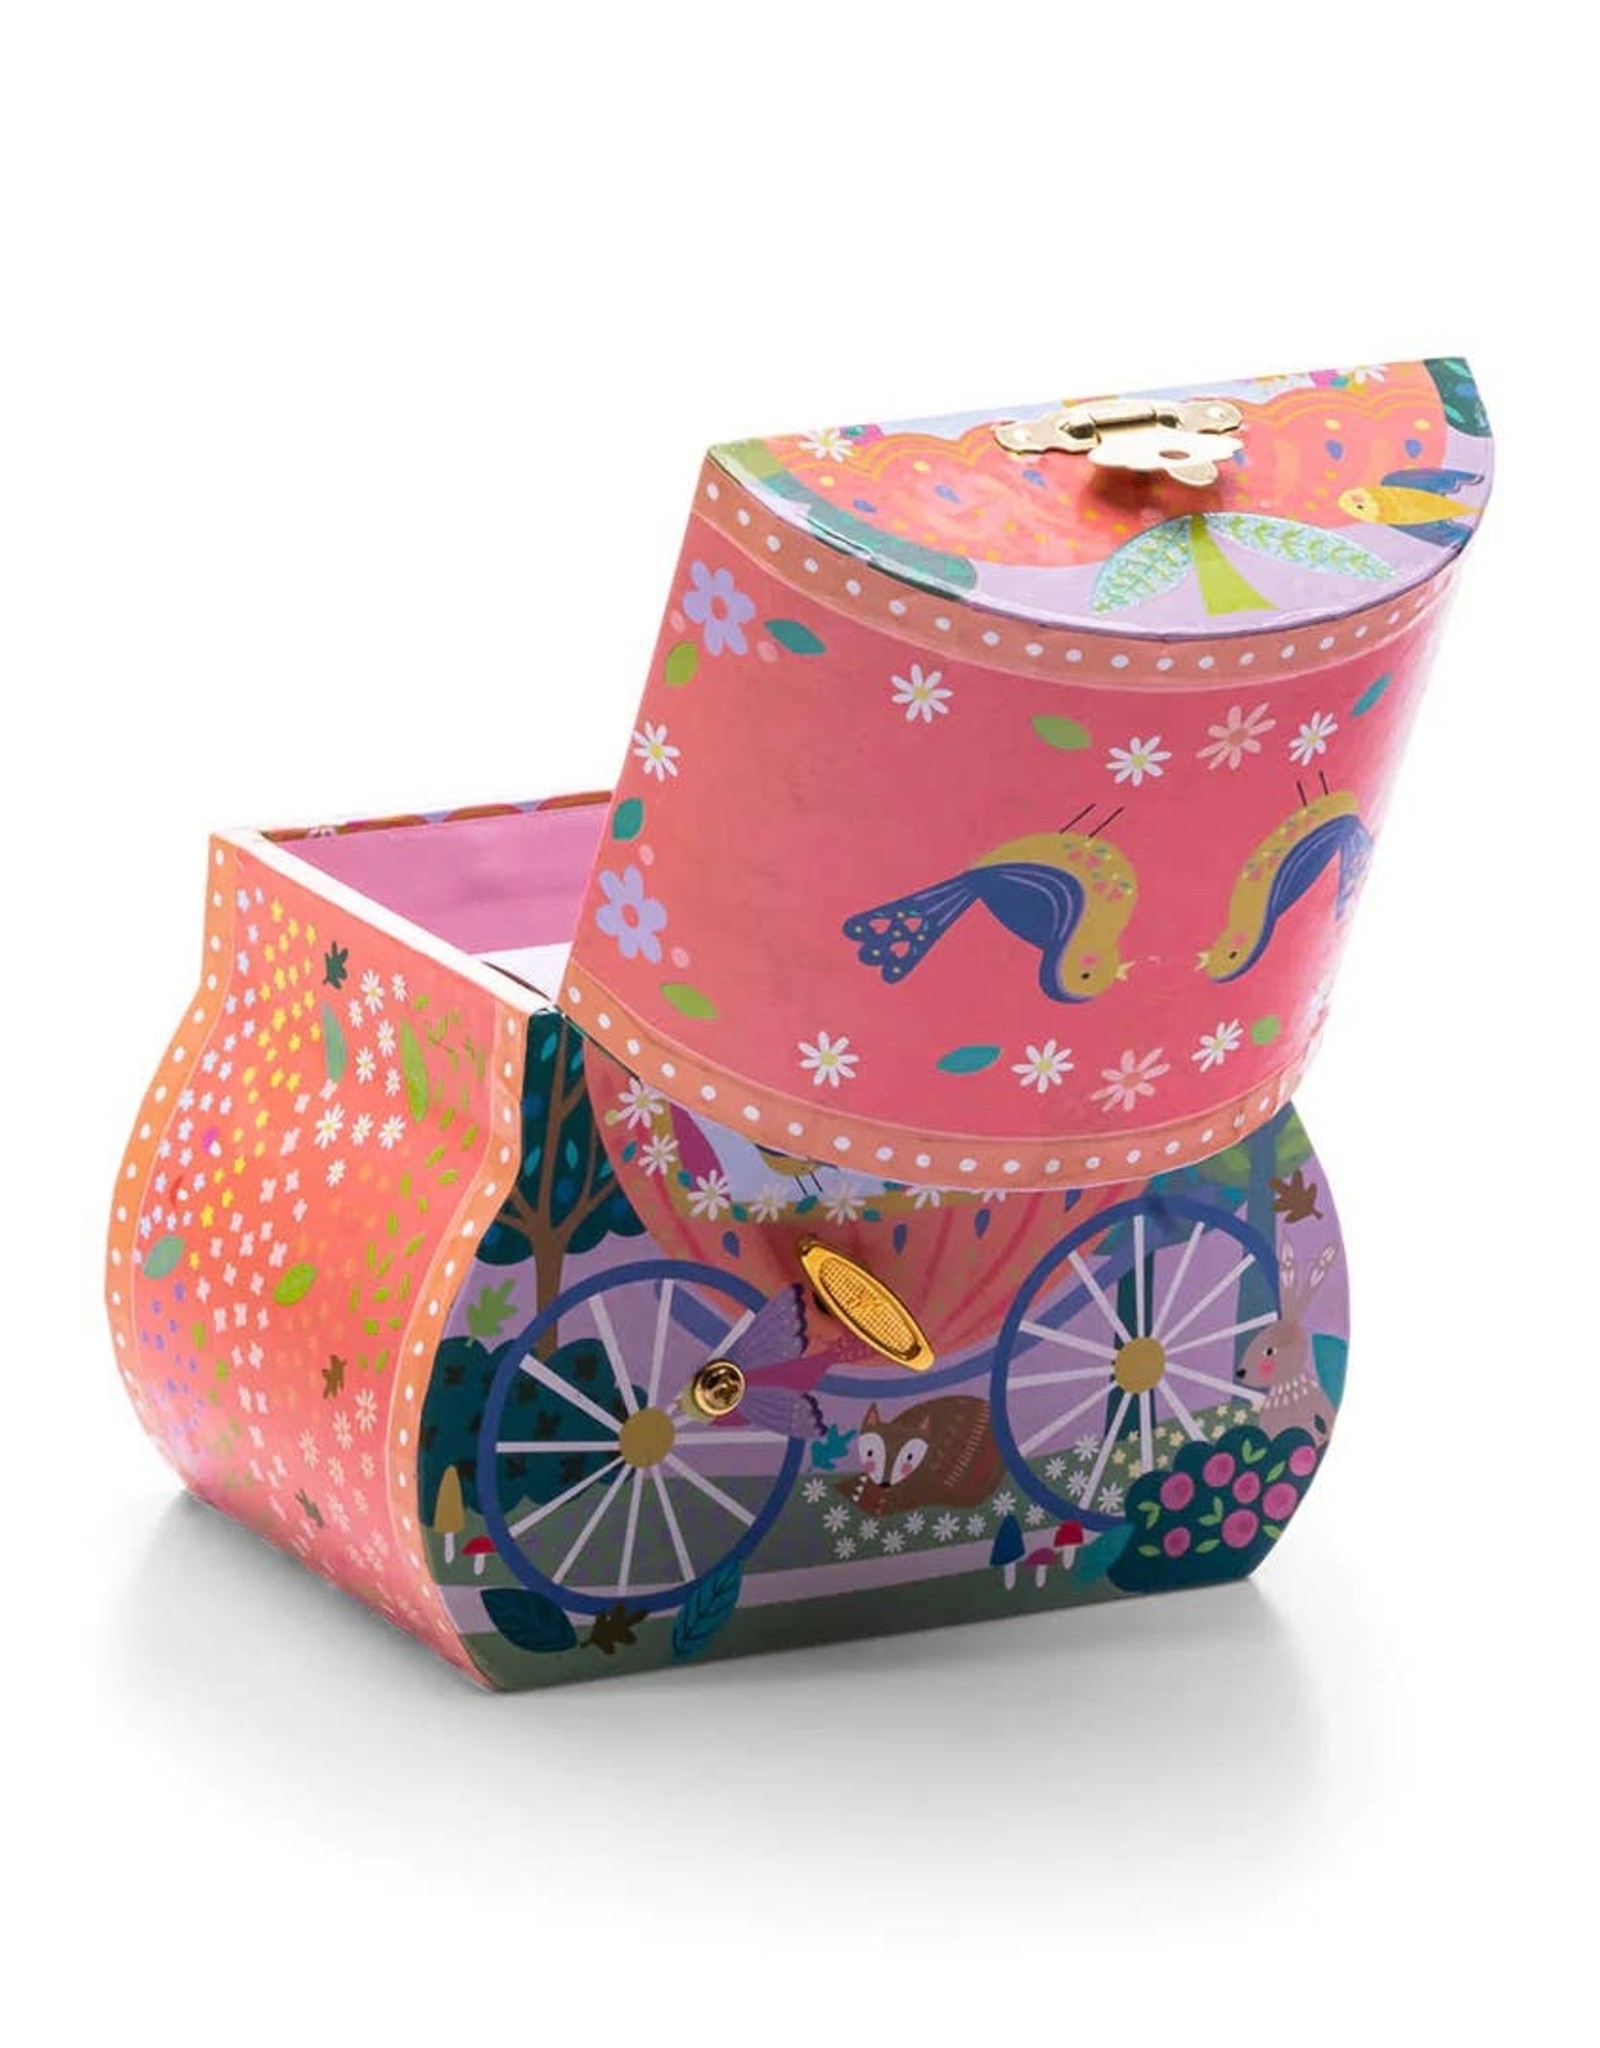 Floss and Rock Fairytale Carriage Jewelry Box